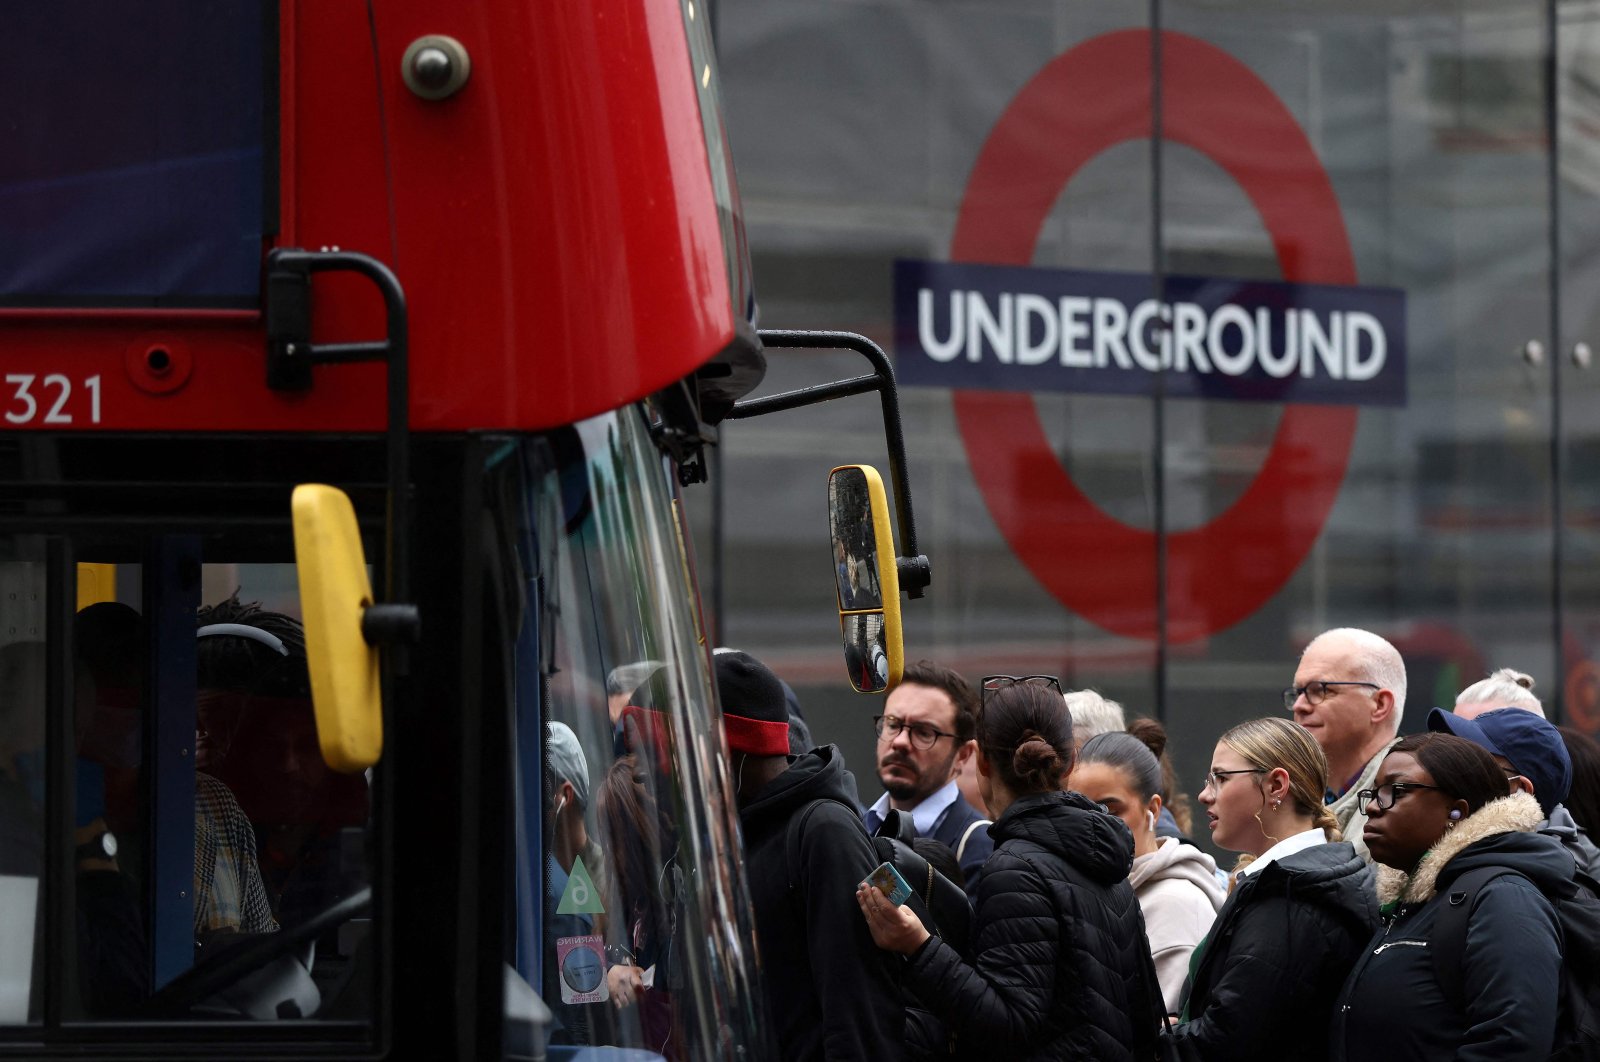 Commuters attempt to board a bus outside Victoria train station during a 24-hour strike by nearly 4,000 London Underground station staff, in London, U.K., June 6, 2022. (AFP Photo)